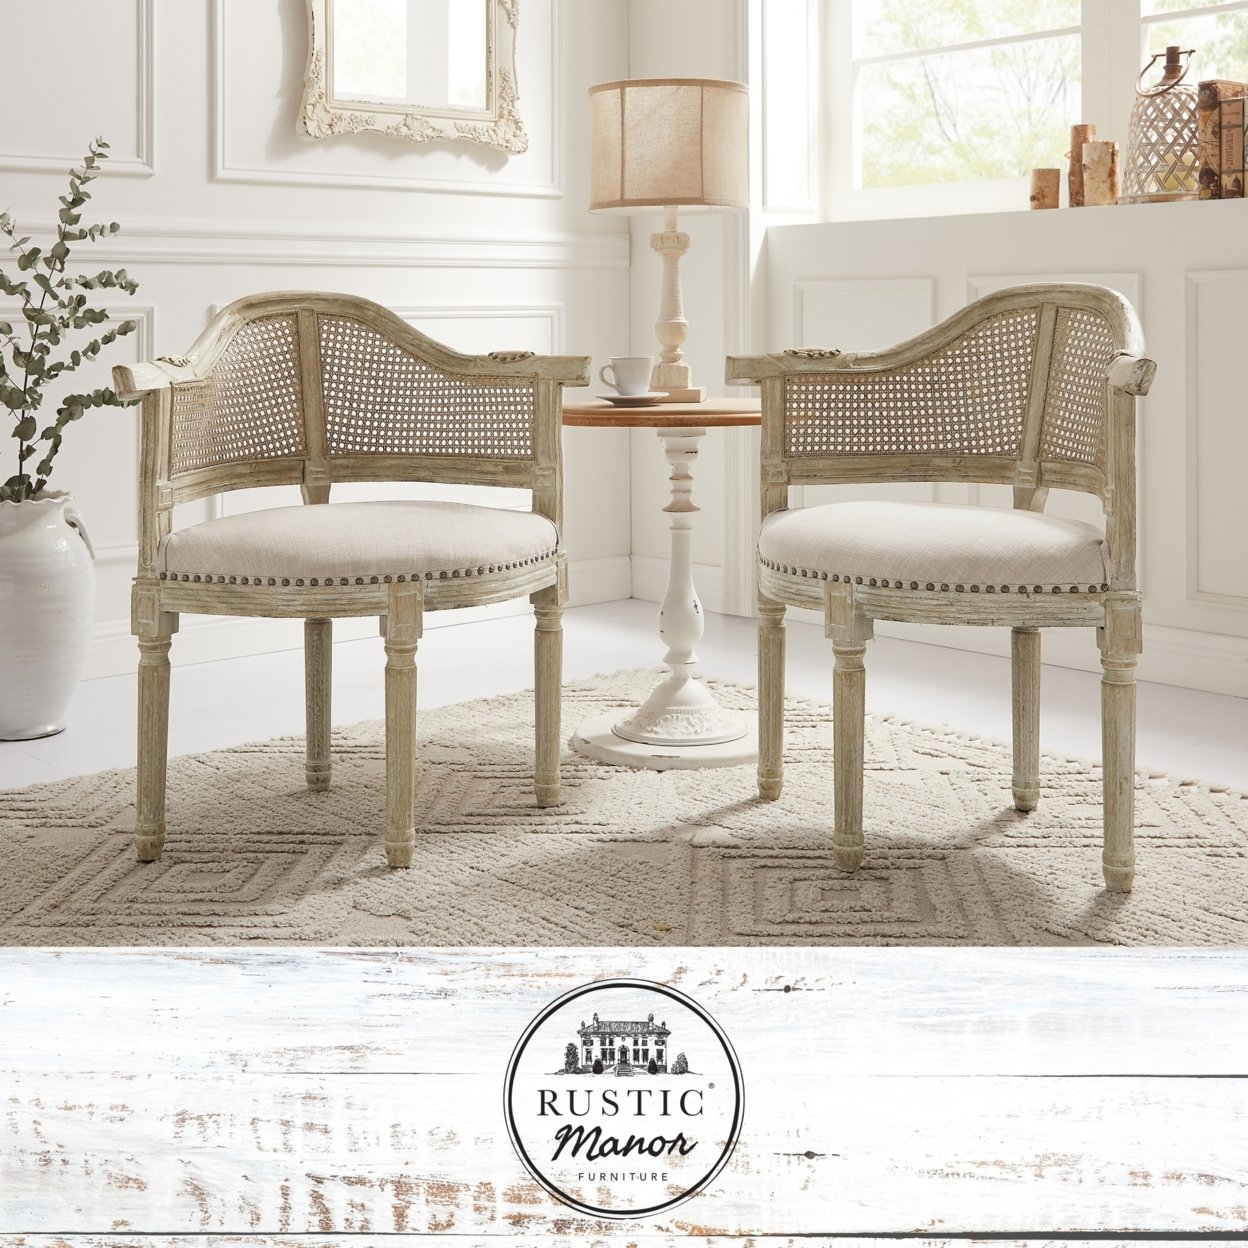 Arius Accent Chair - Upholstered, Nailhead Trim , Rattan Imitation, Curved Back , Antique Brushed Wood Finish - Grey